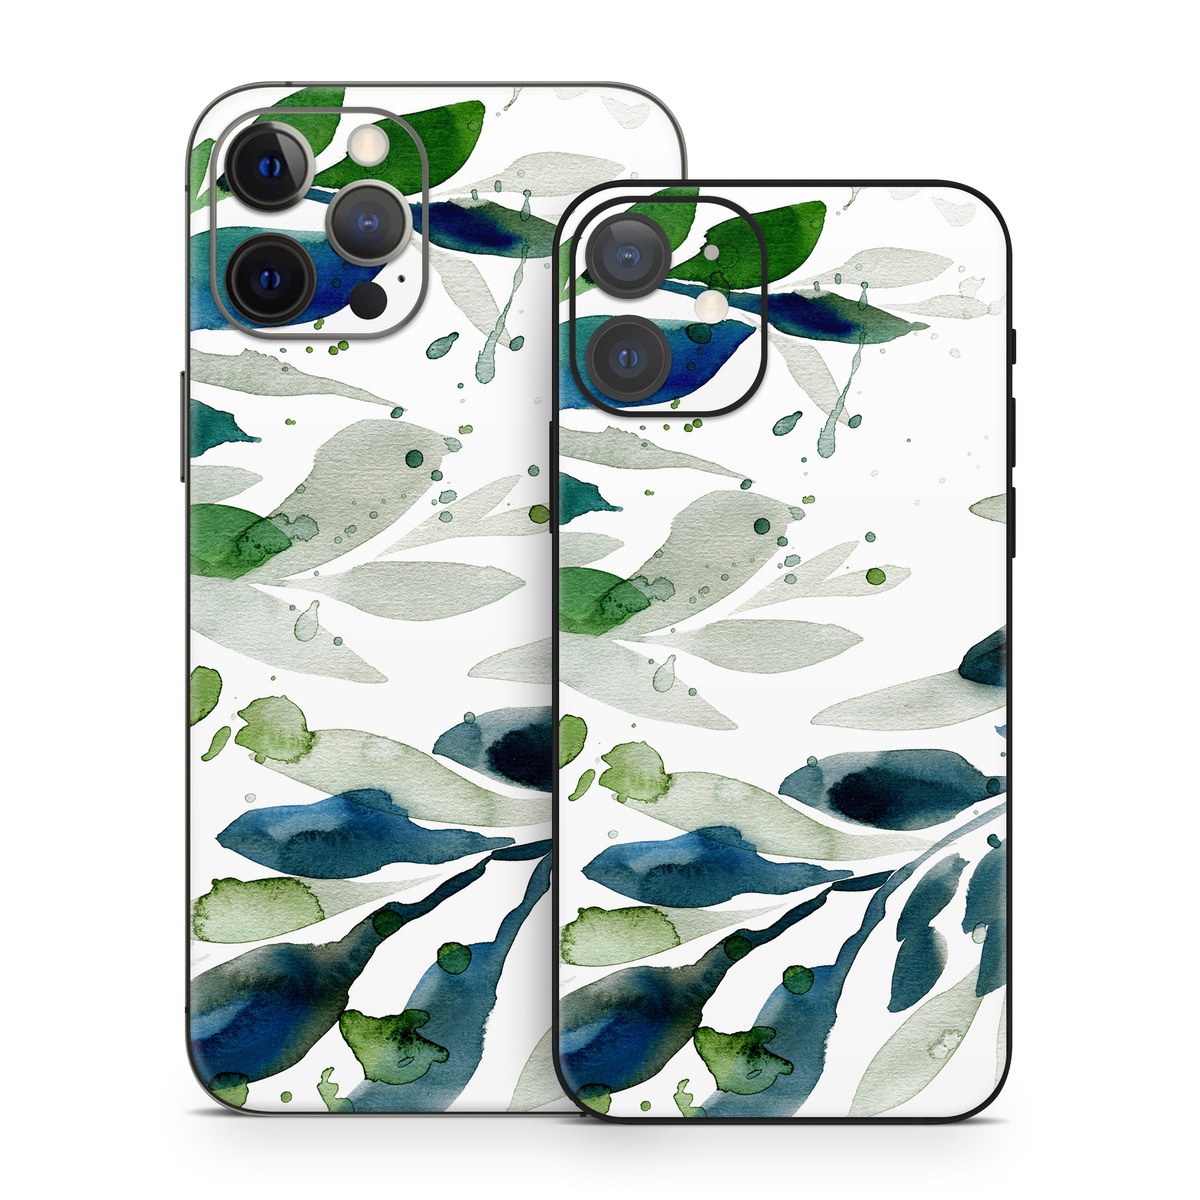 iPhone 12 Skin design of Leaf, Branch, Plant, Tree, Botany, Flower, Design, Eucalyptus, Pattern, Watercolor paint, with white, blue, green, gray colors